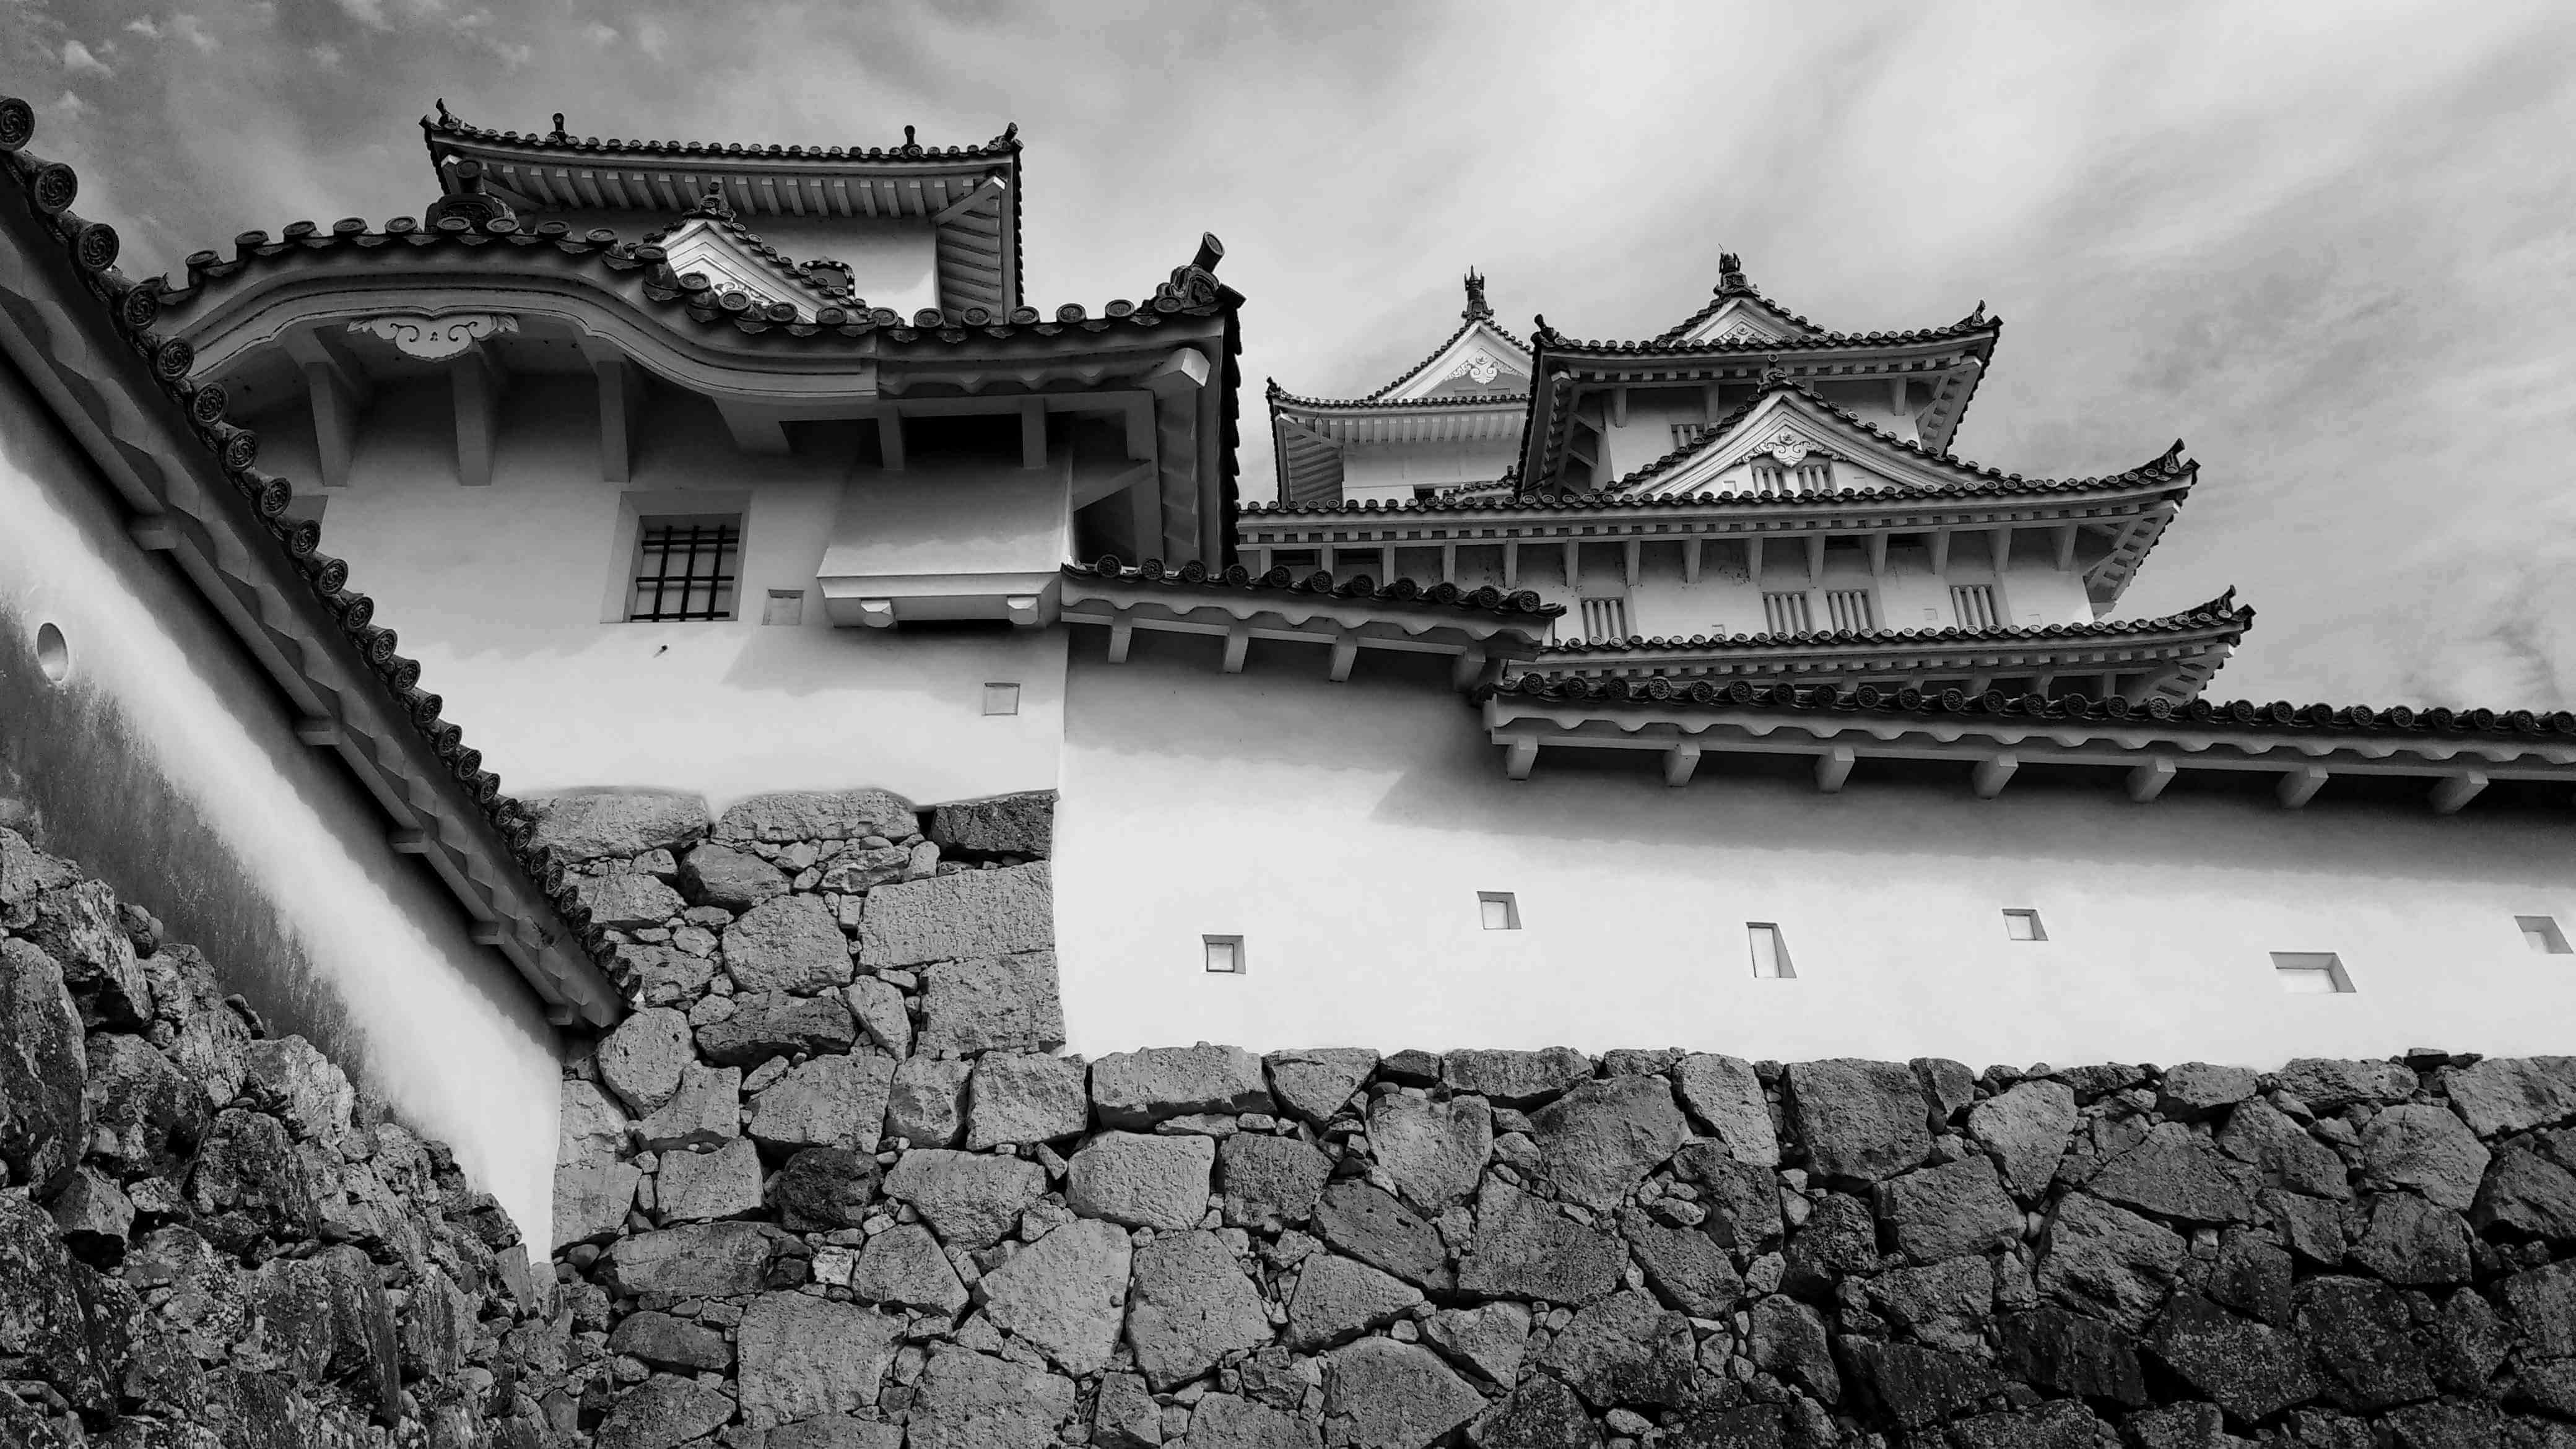 An old white Japanese castle